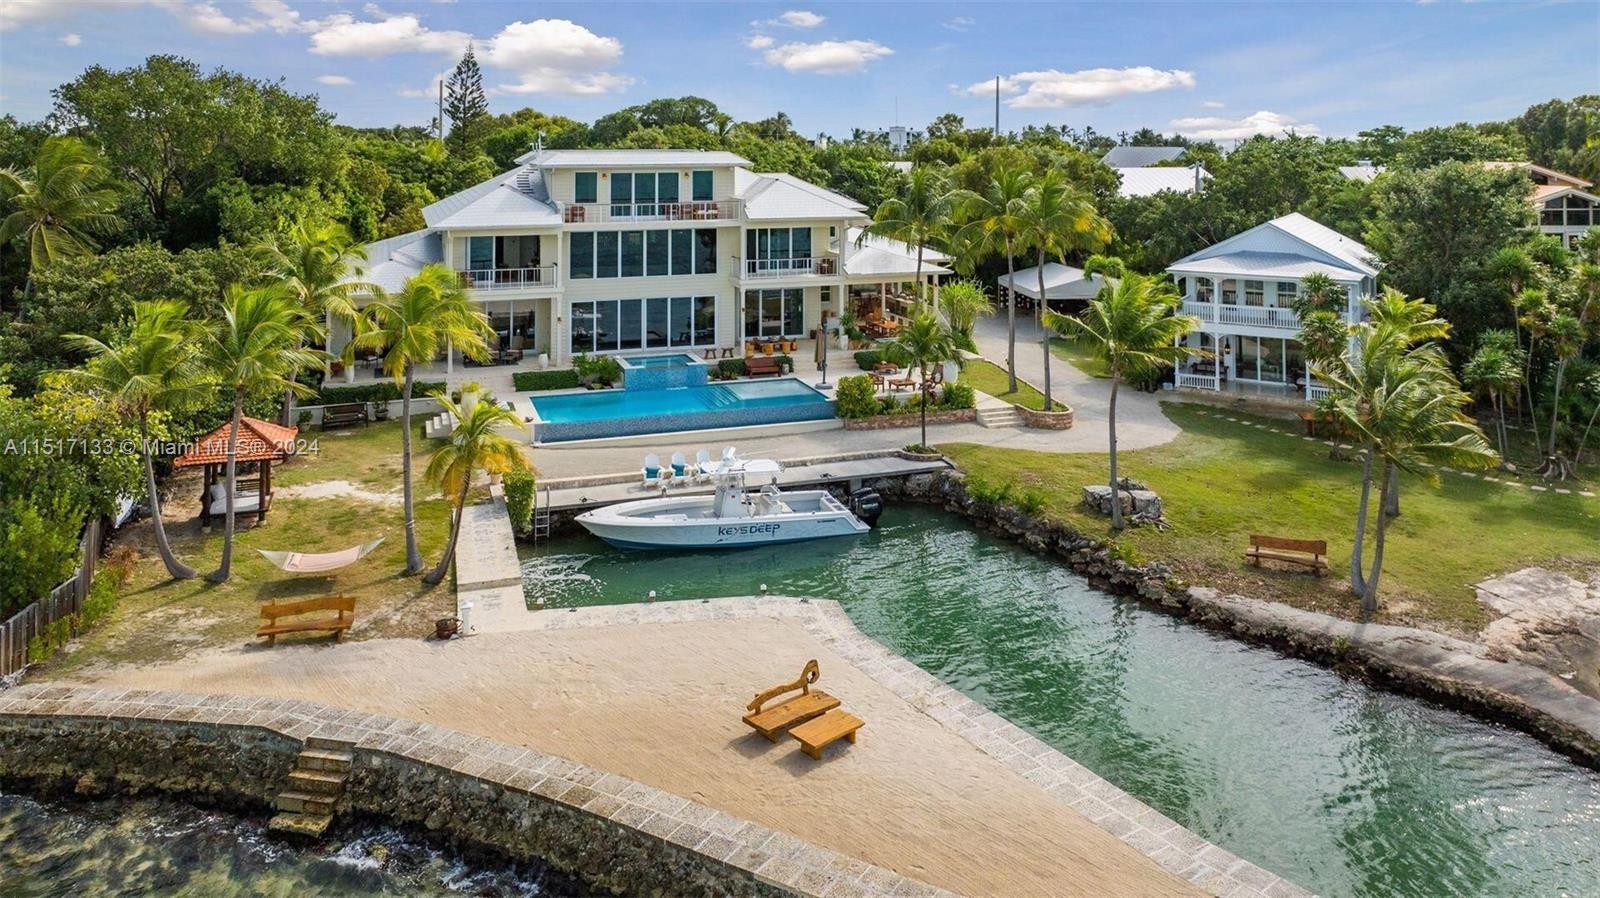 Property for Sale at Address Not Disclosed, Islamorada, Monroe County, Florida - Bedrooms: 7 
Bathrooms: 9  - $25,000,000